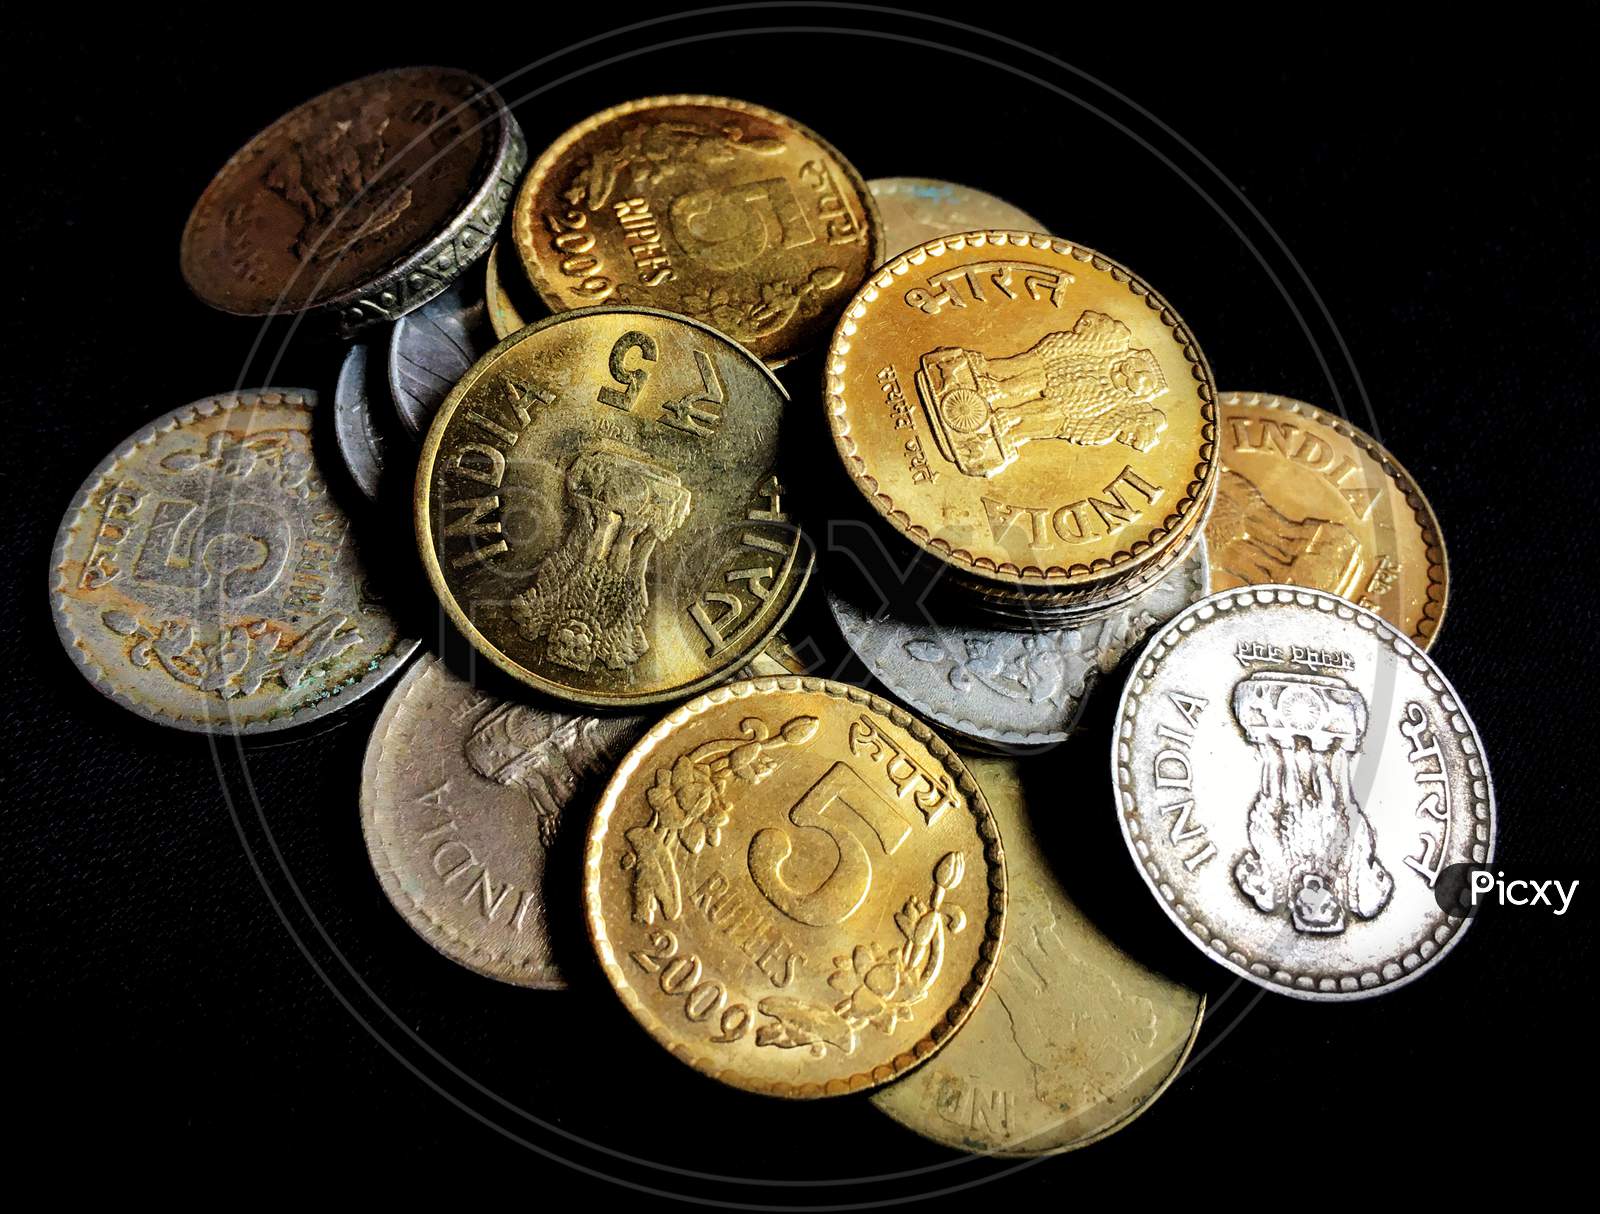 Collection of Indian five rupee coins